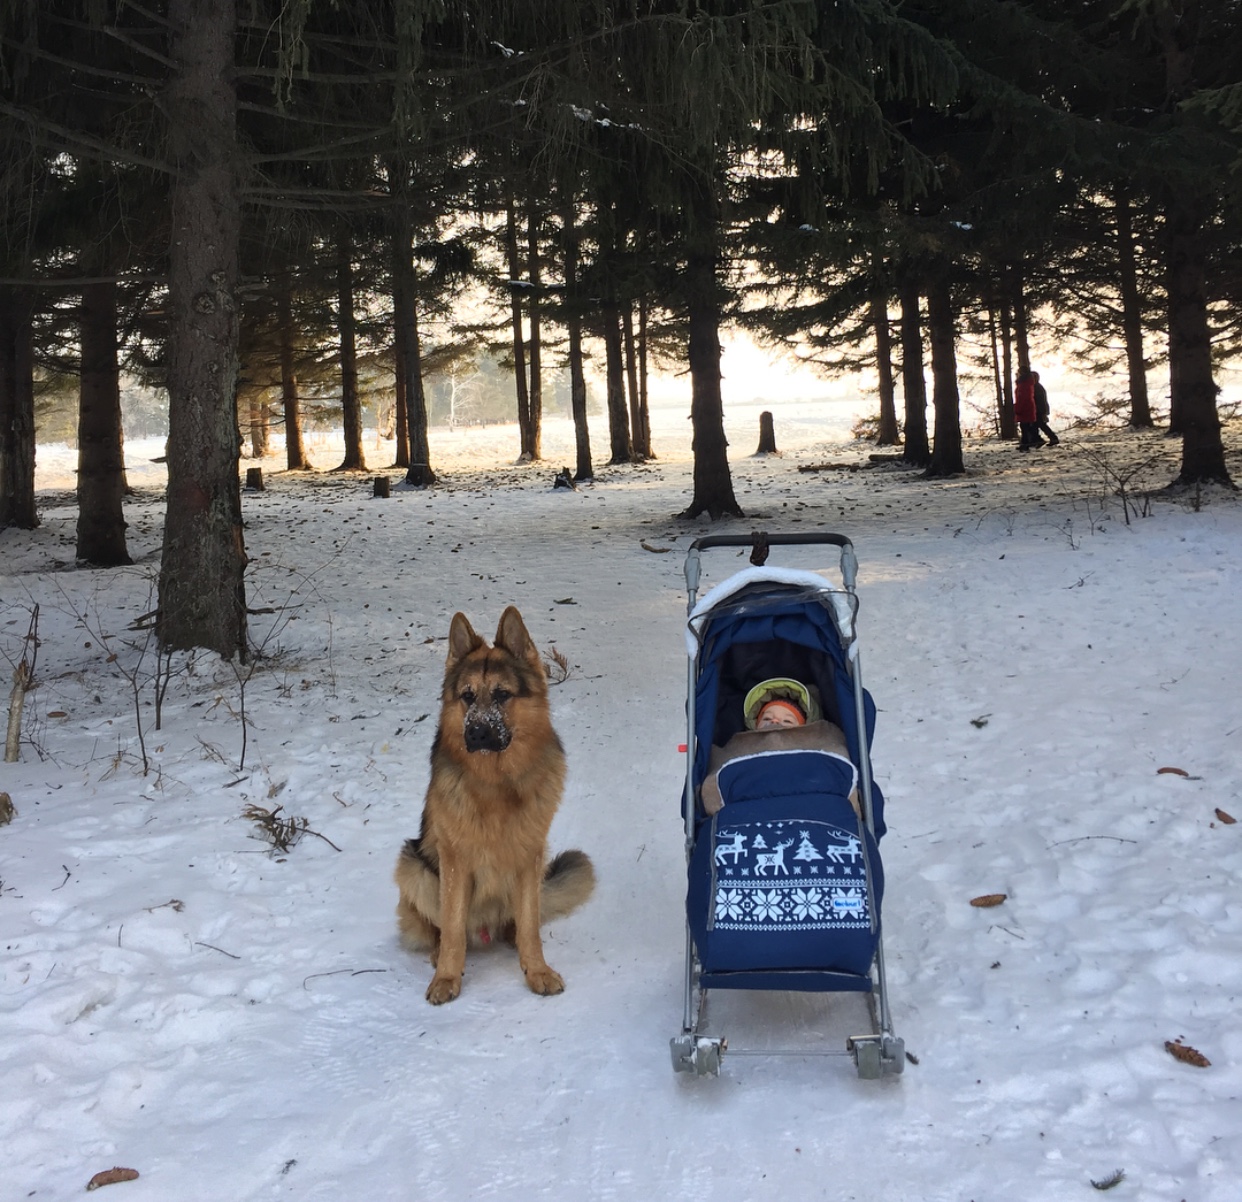 A German Shepherd sitting in snow at the park next to a baby in a stroller